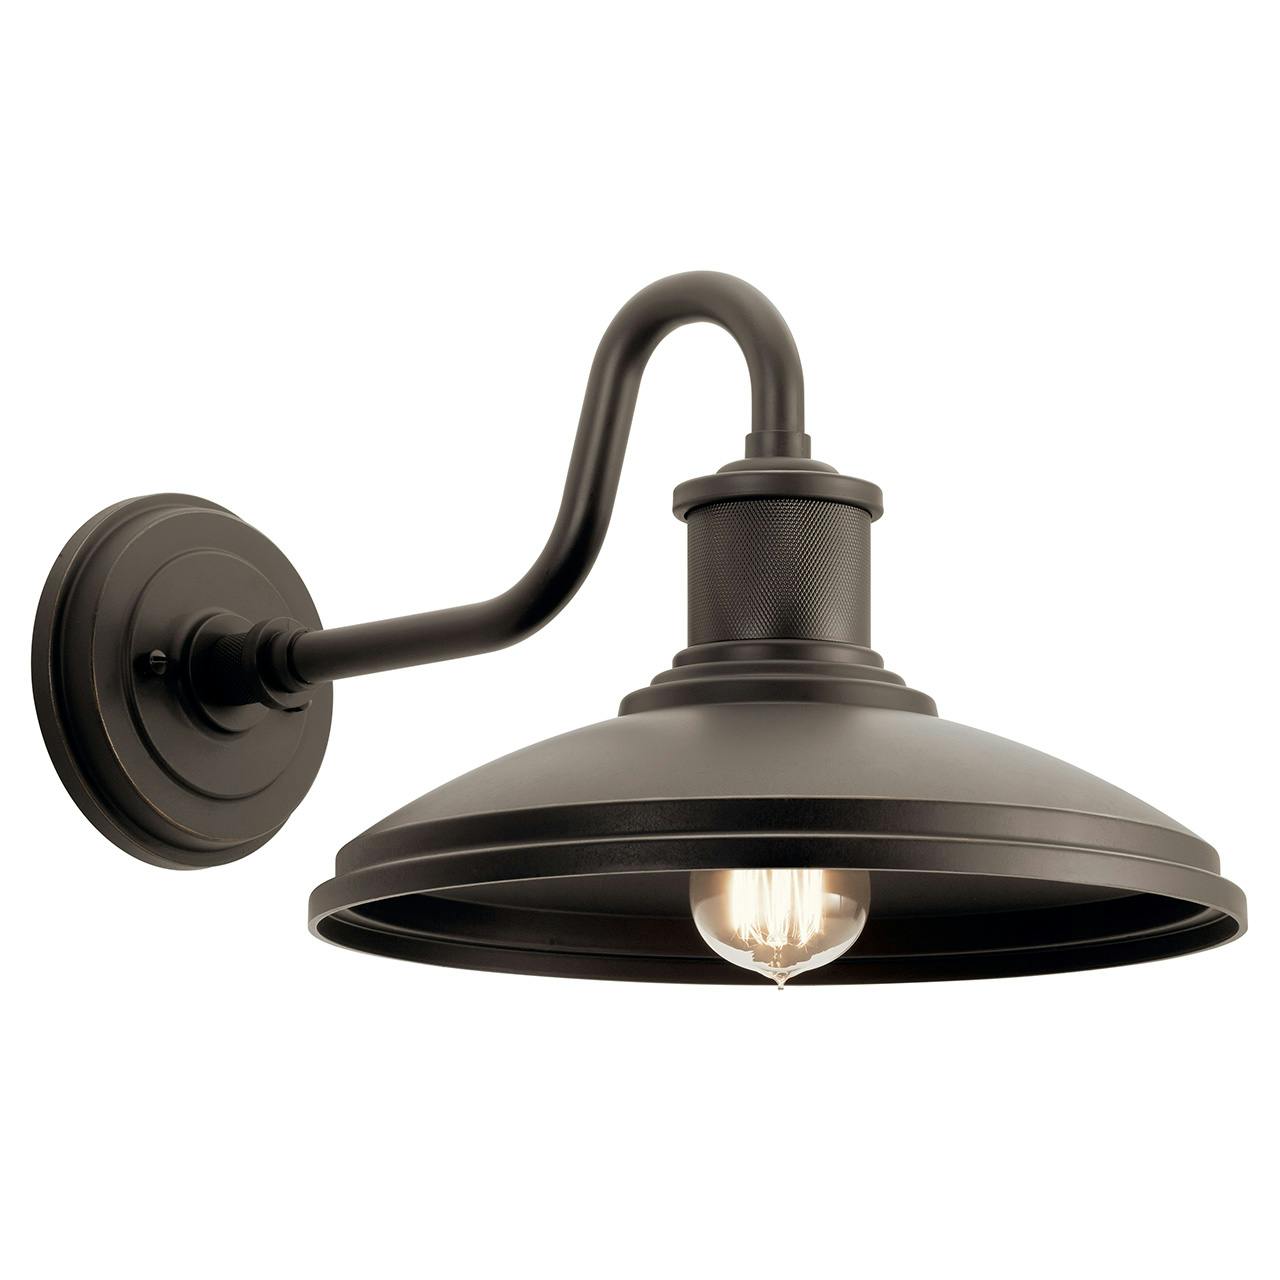 Allenbury 12" Wall Light Olde Bronze on a white background